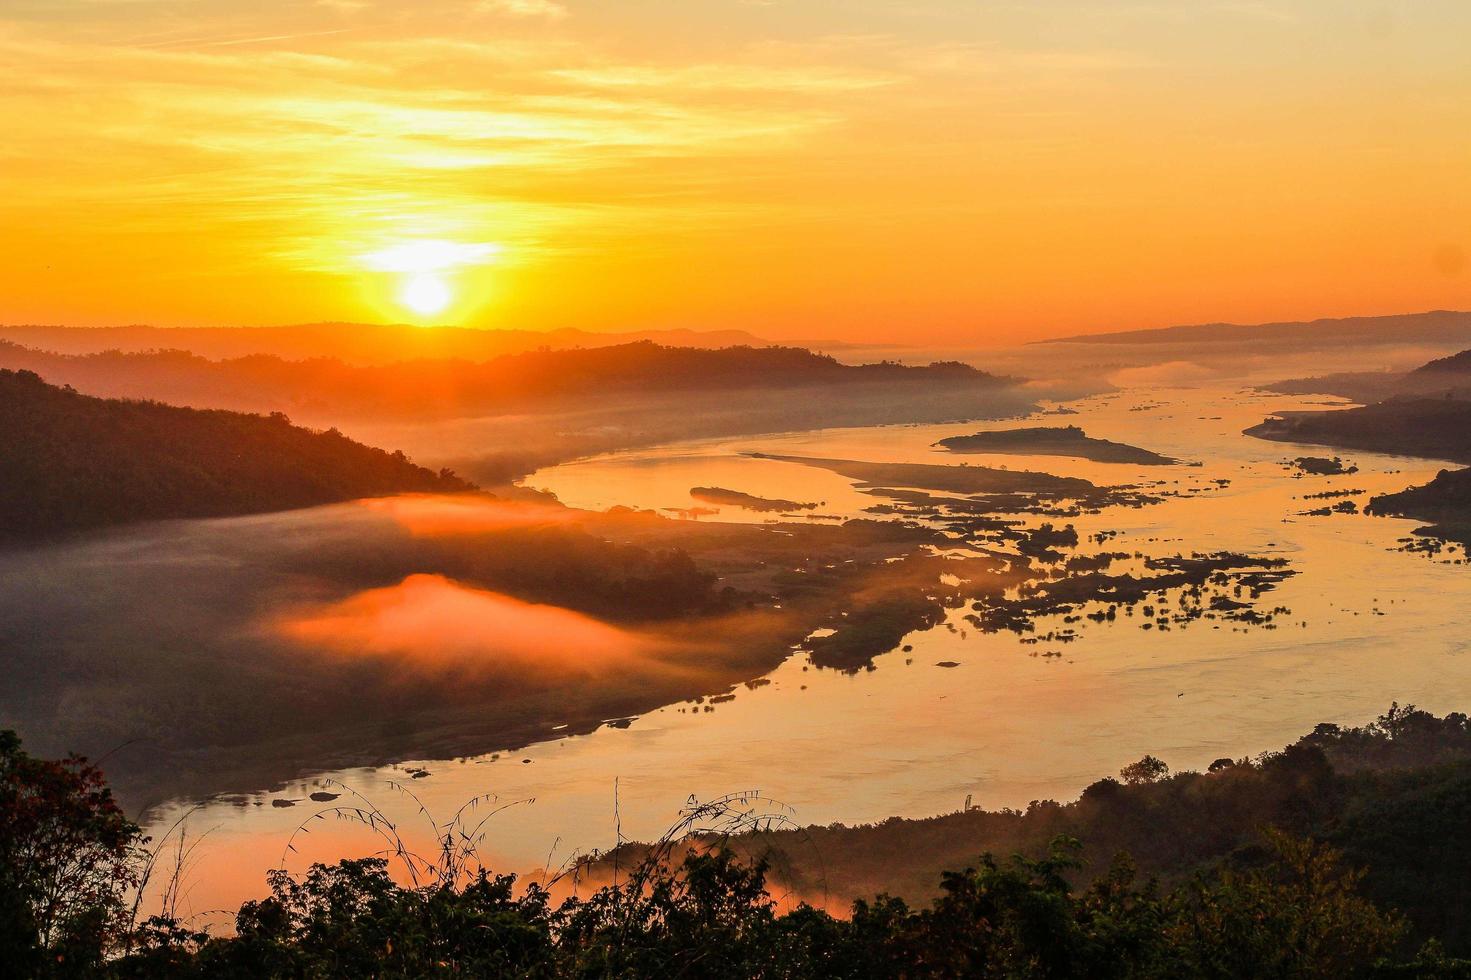 Morning sunlight at the Mekong River, Sangkhom District, Thailand photo